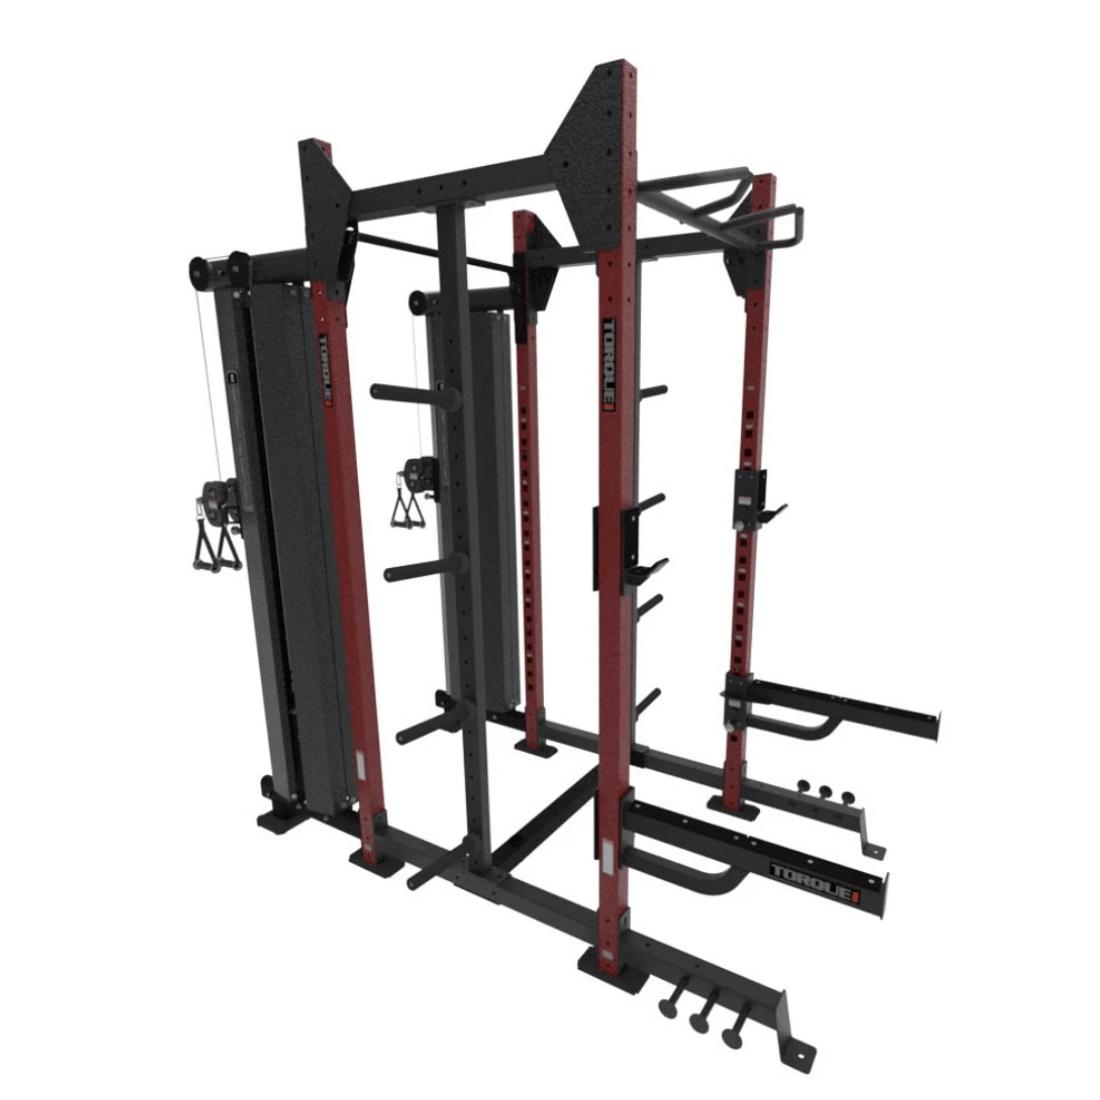 Torque Power Rack - Storage Cable Rack - X1 Package 4 X 4 Foot X-Siege-4